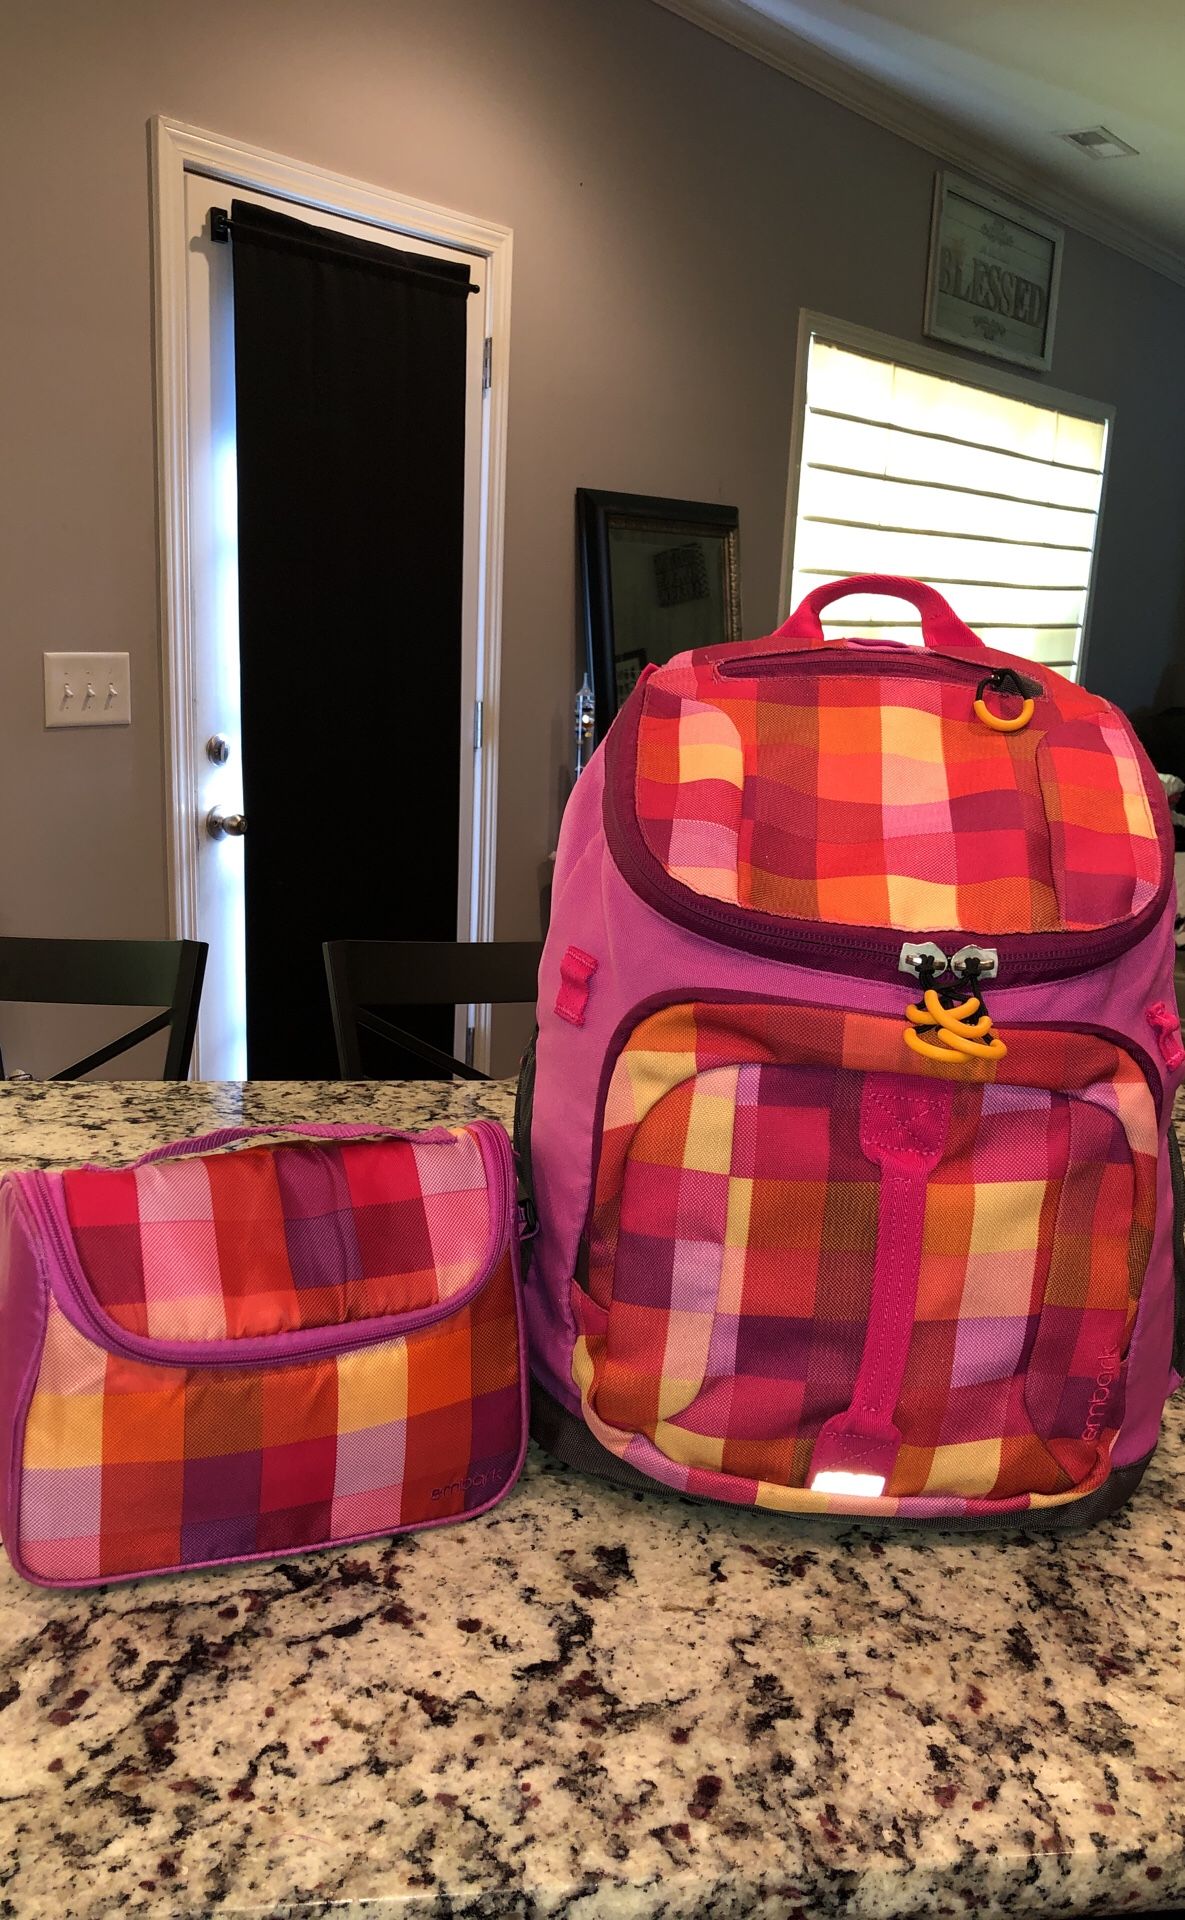 EMBARK Brand (Target) Multicolored Bookbag/Backpack & Matching Insulated Lunchbox